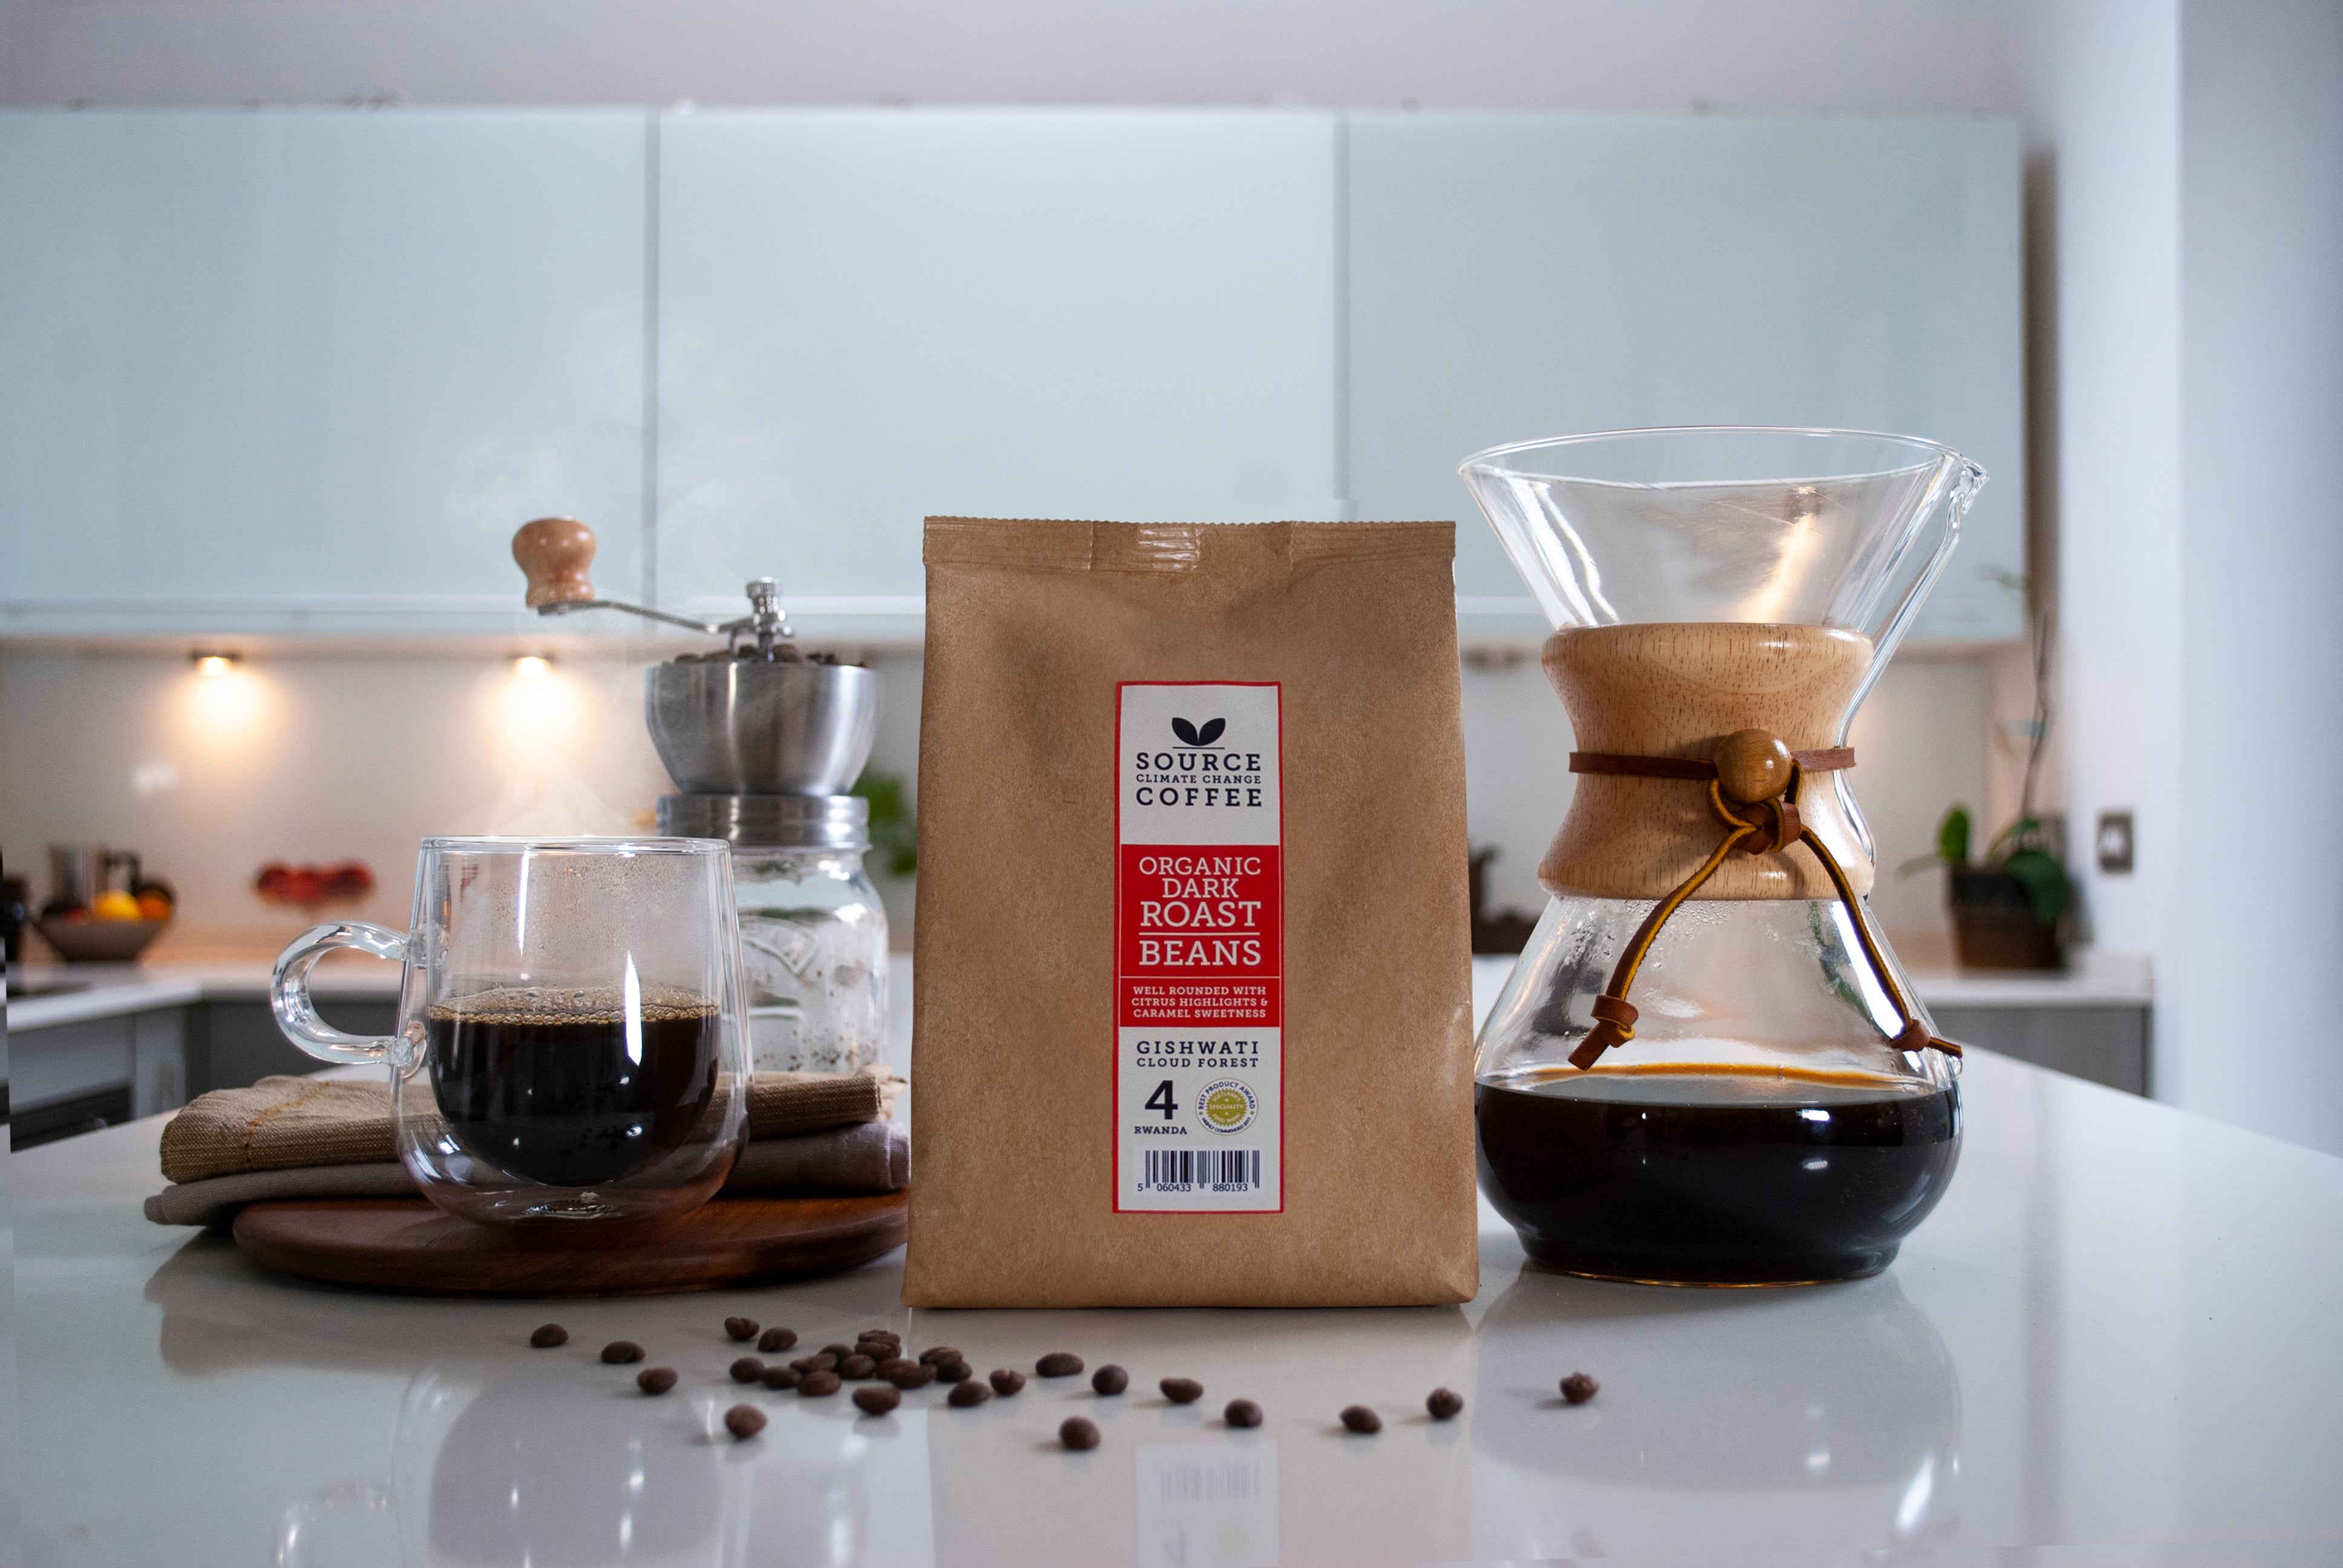 3 Month Coffee Subscription Gift (Beans or Roast & Ground) - Source Climate Change Coffee